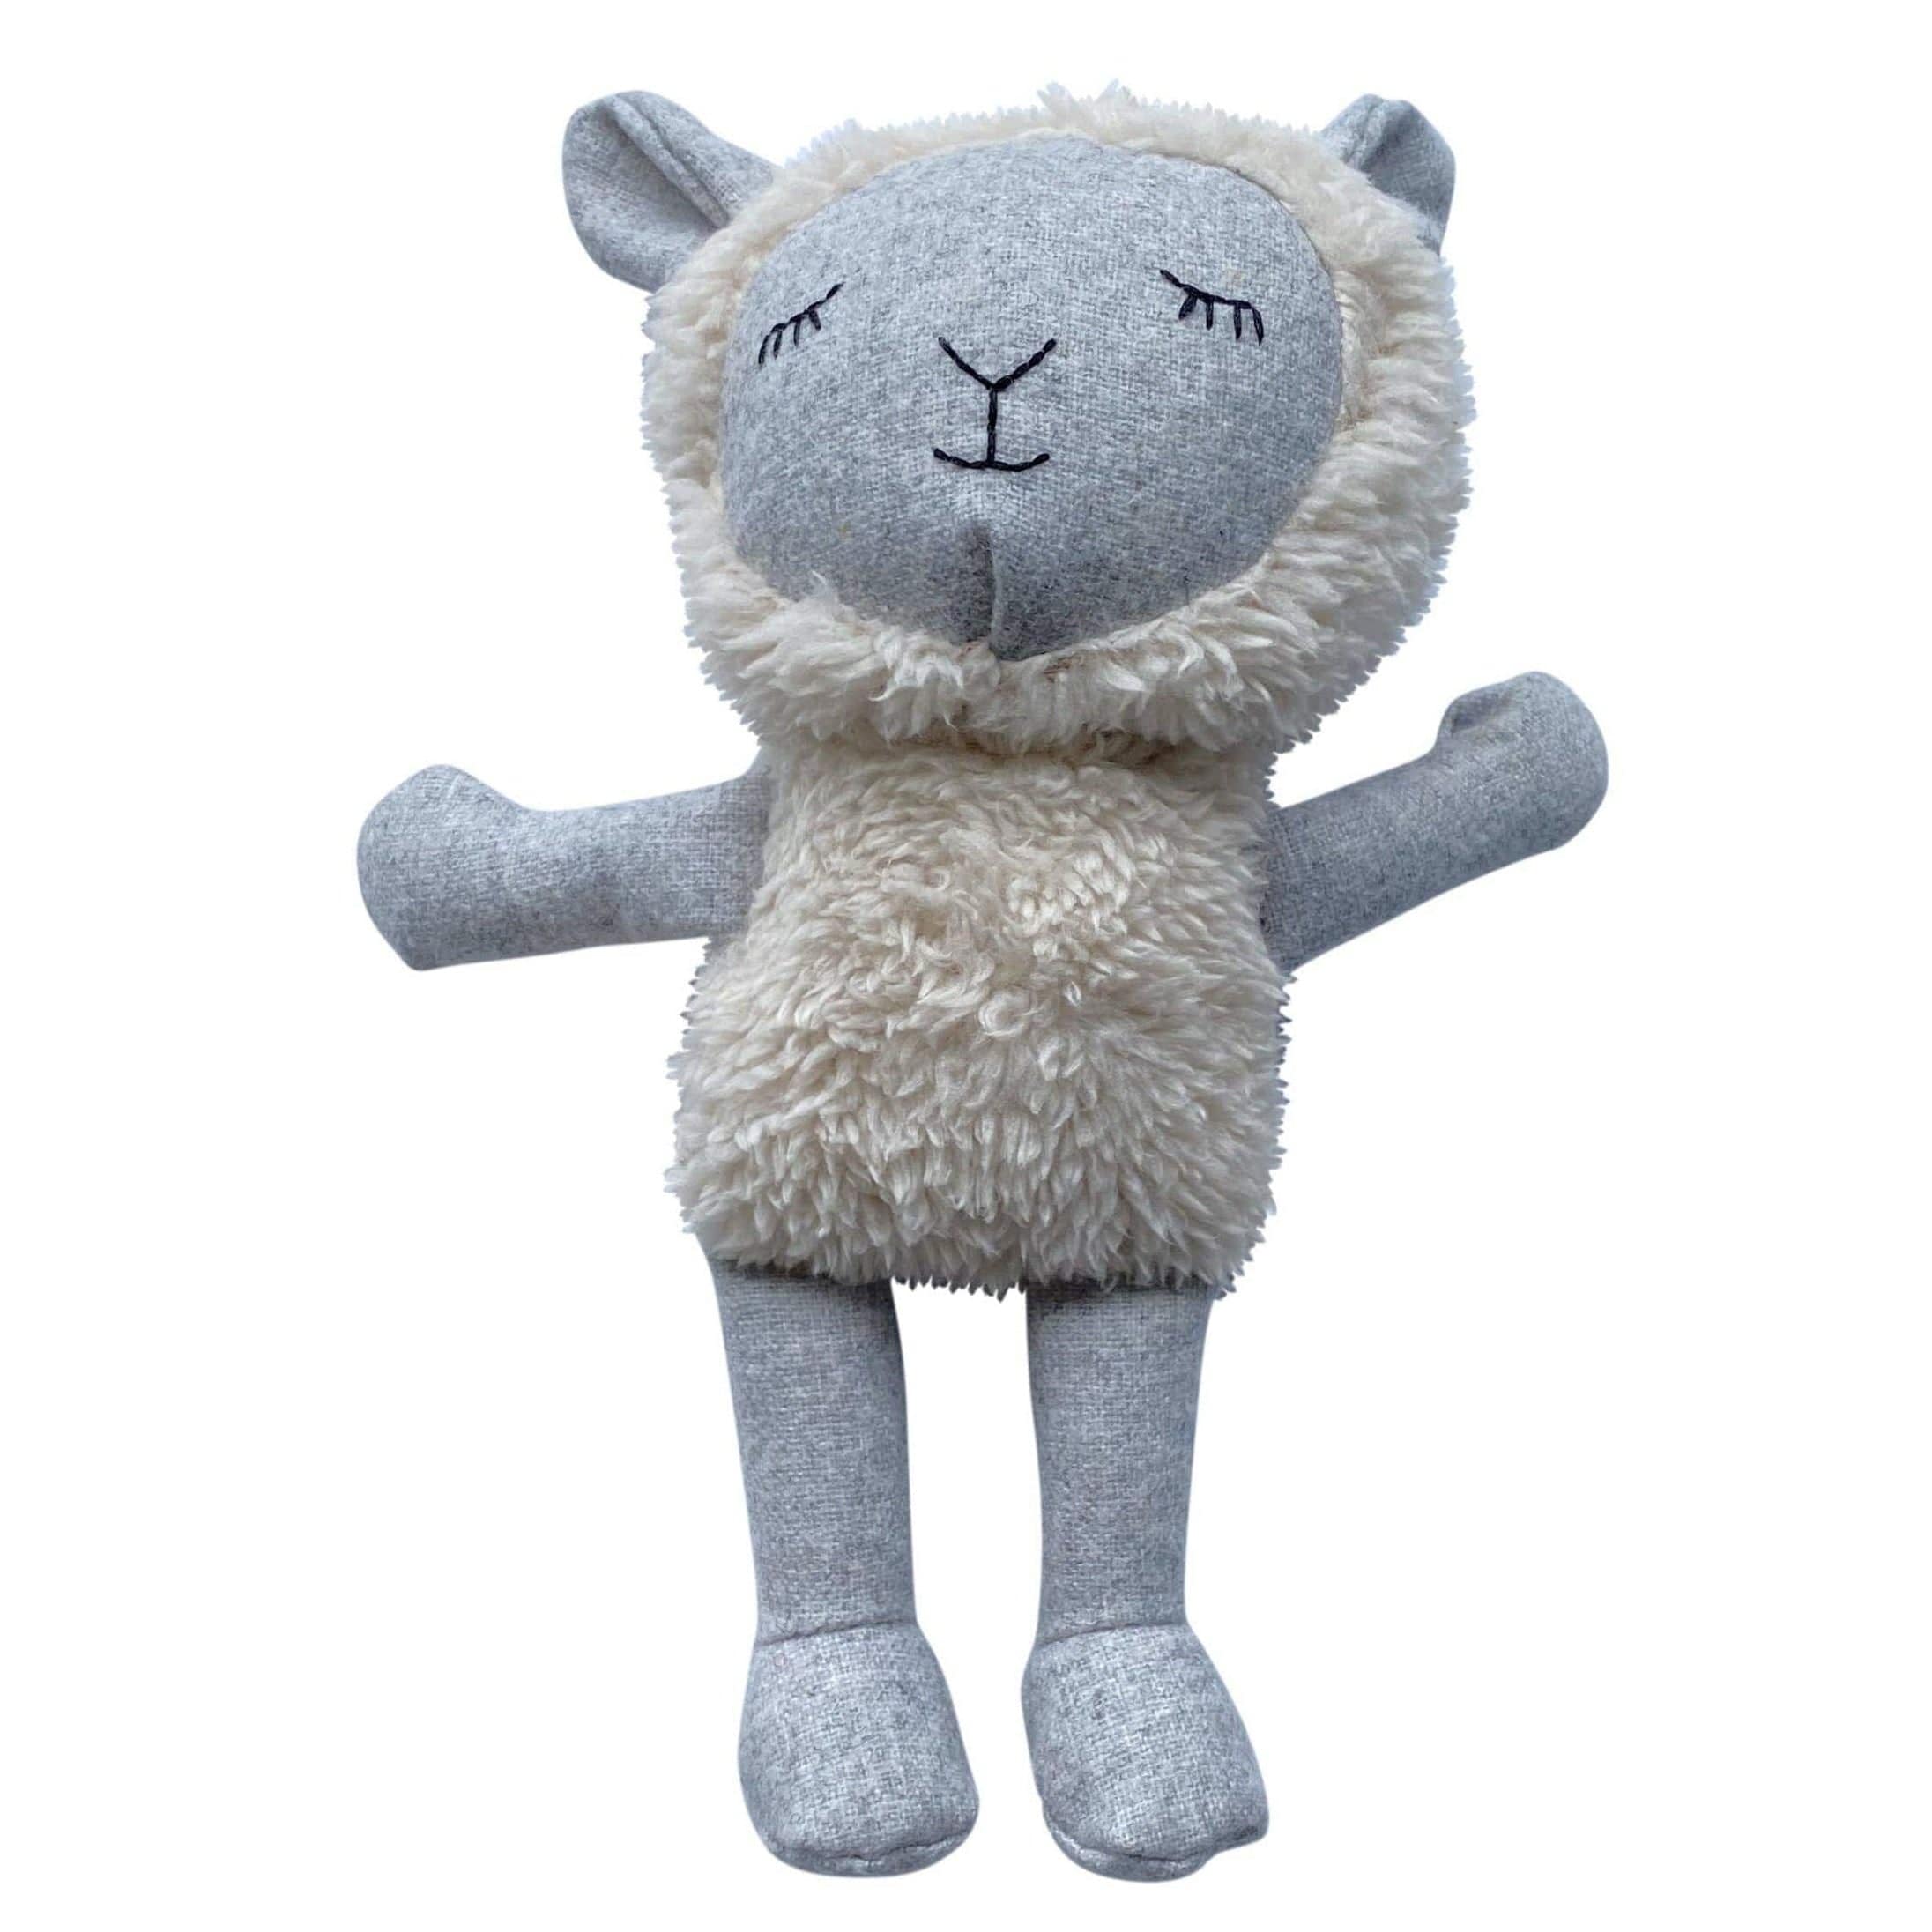 Mini Plush Gladys Sheep by and the little dog laughed